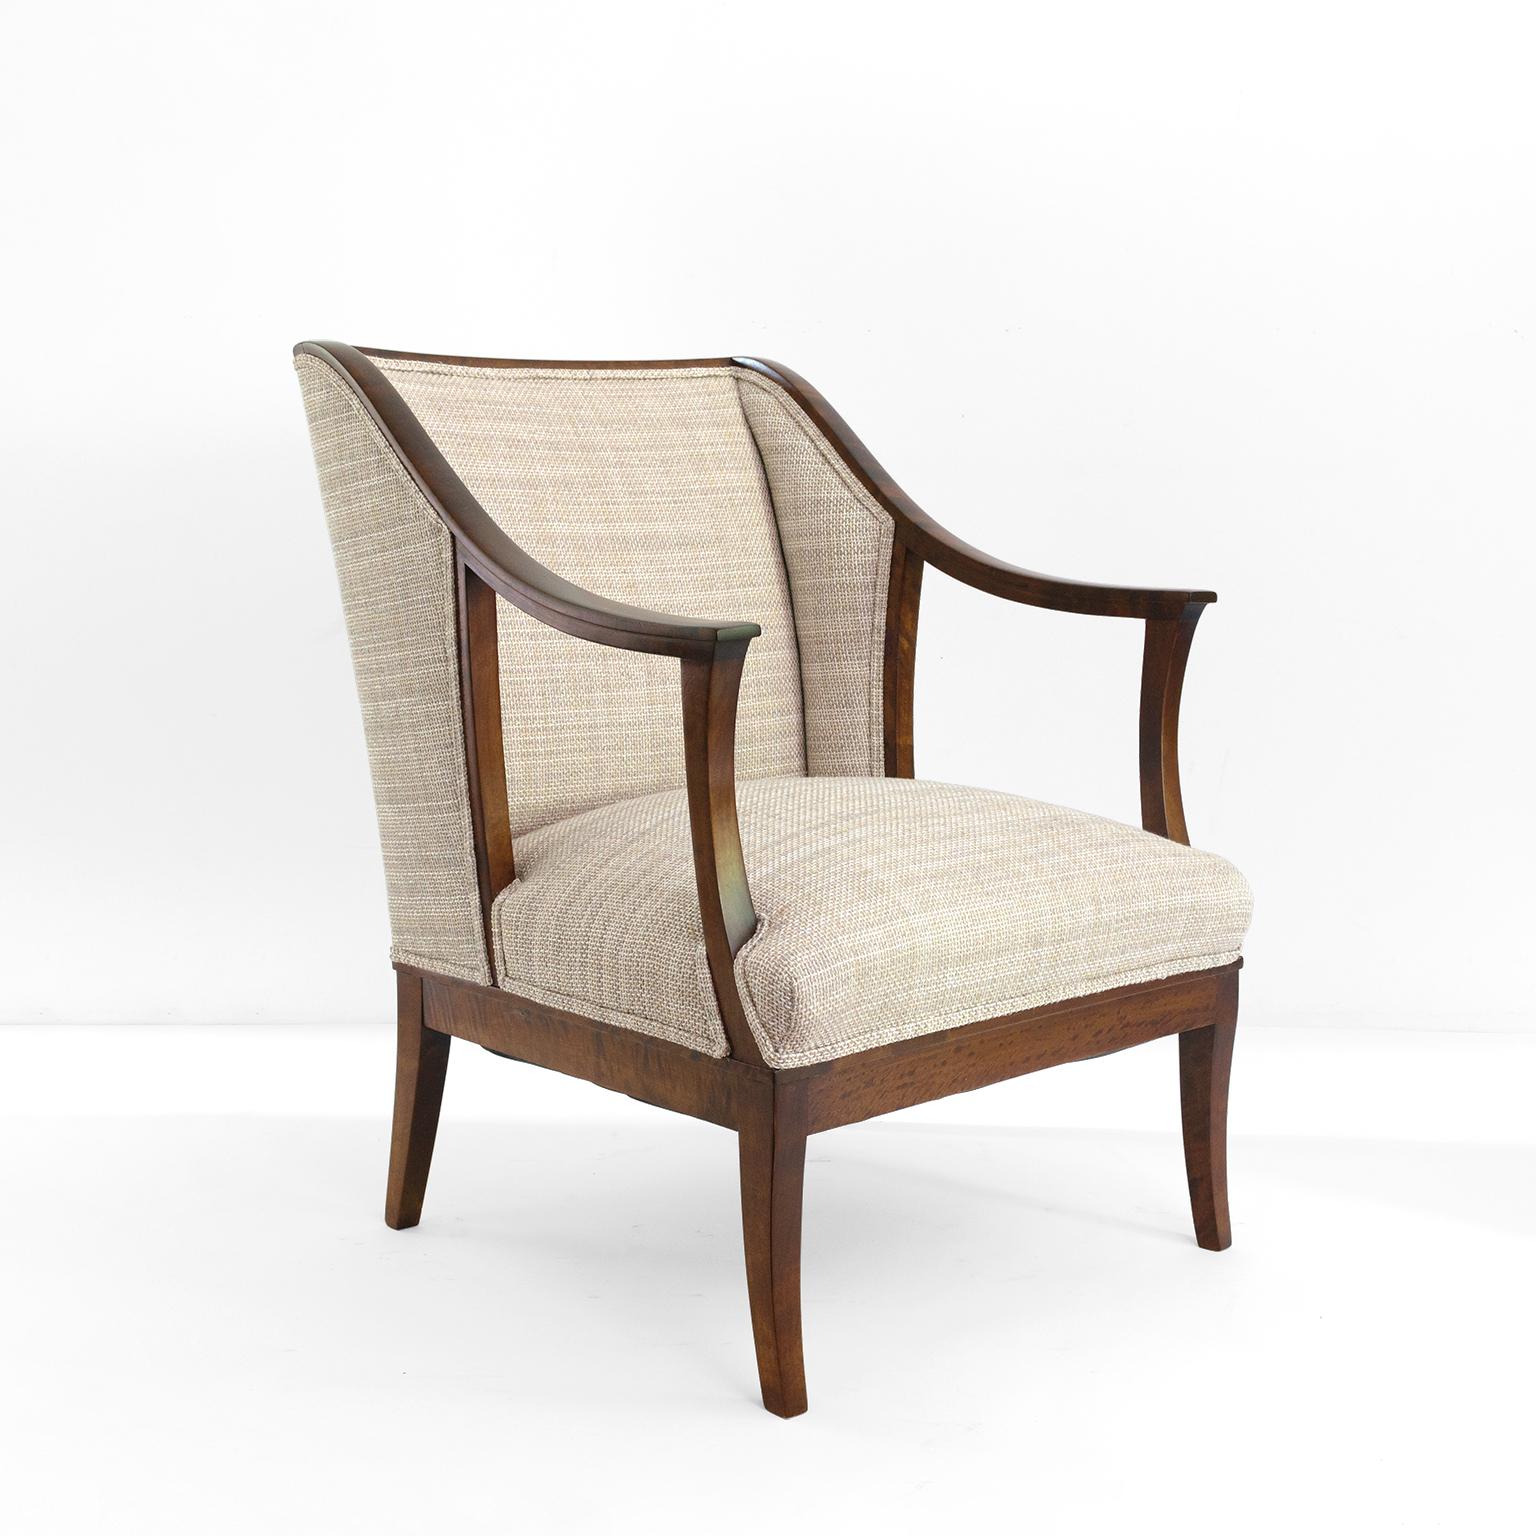 Scandinavian Swedish Armchairs in Stained Solid Birch, by SFM Bodafors, circa 1930 For Sale